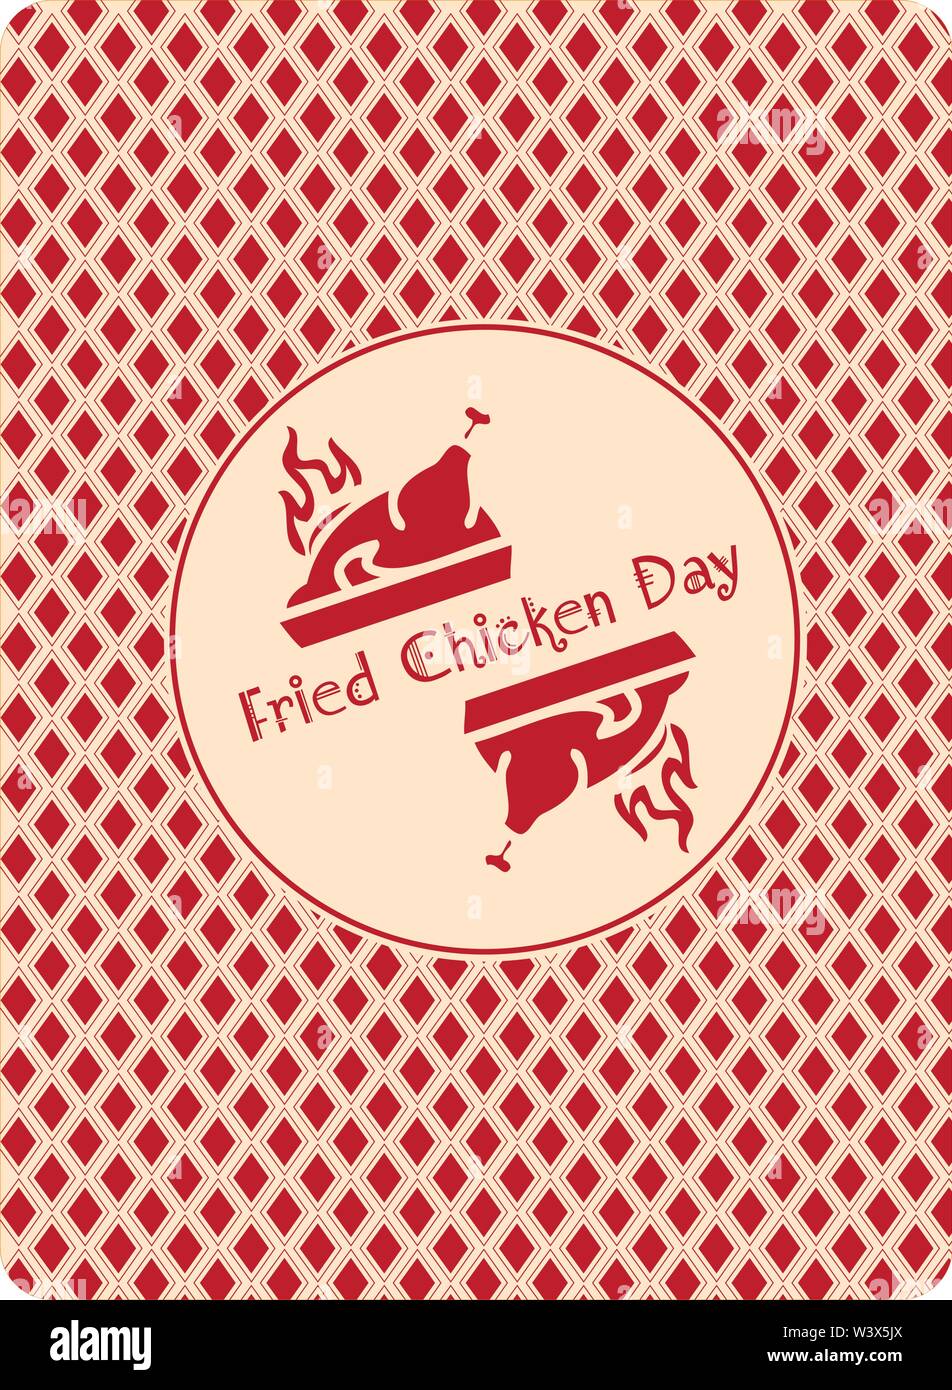 Fried Chicken Day The Reverse Side Of The Card Game Stock Vector